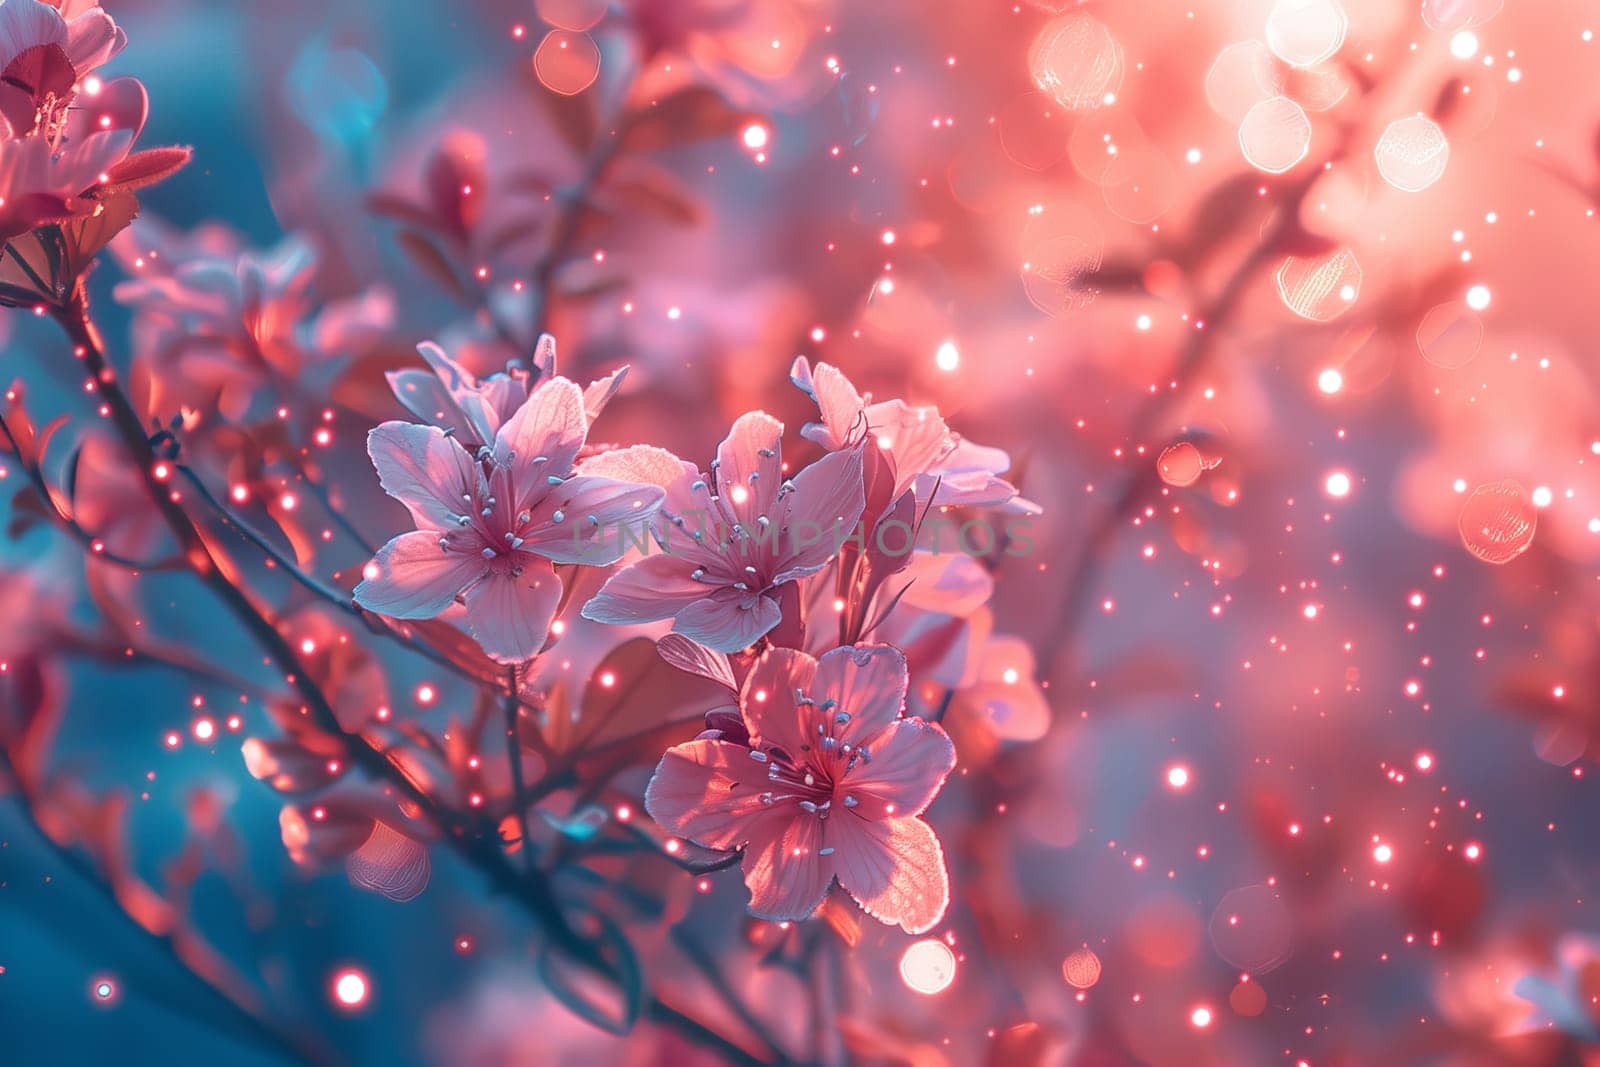 A close up of a pink flower with a blurry background. The flower is surrounded by a lot of light and sparkles, giving it a dreamy and ethereal feel